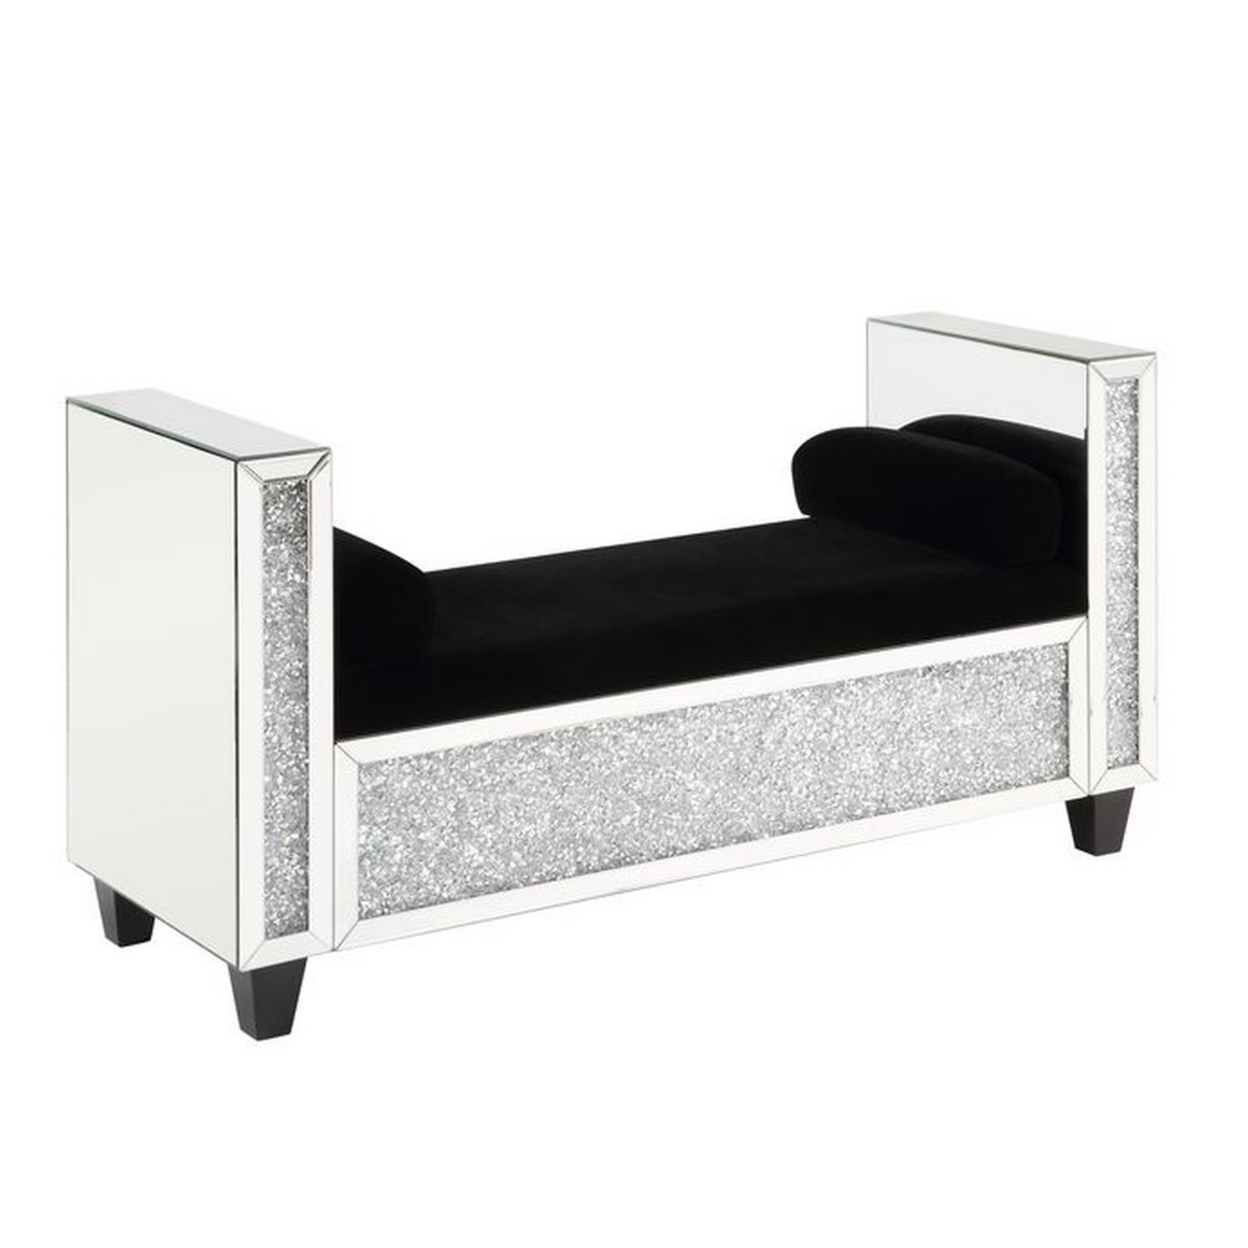 Mirrored Bench With 2 Pillows And Button Tufted Seat, Silver- Saltoro Sherpi